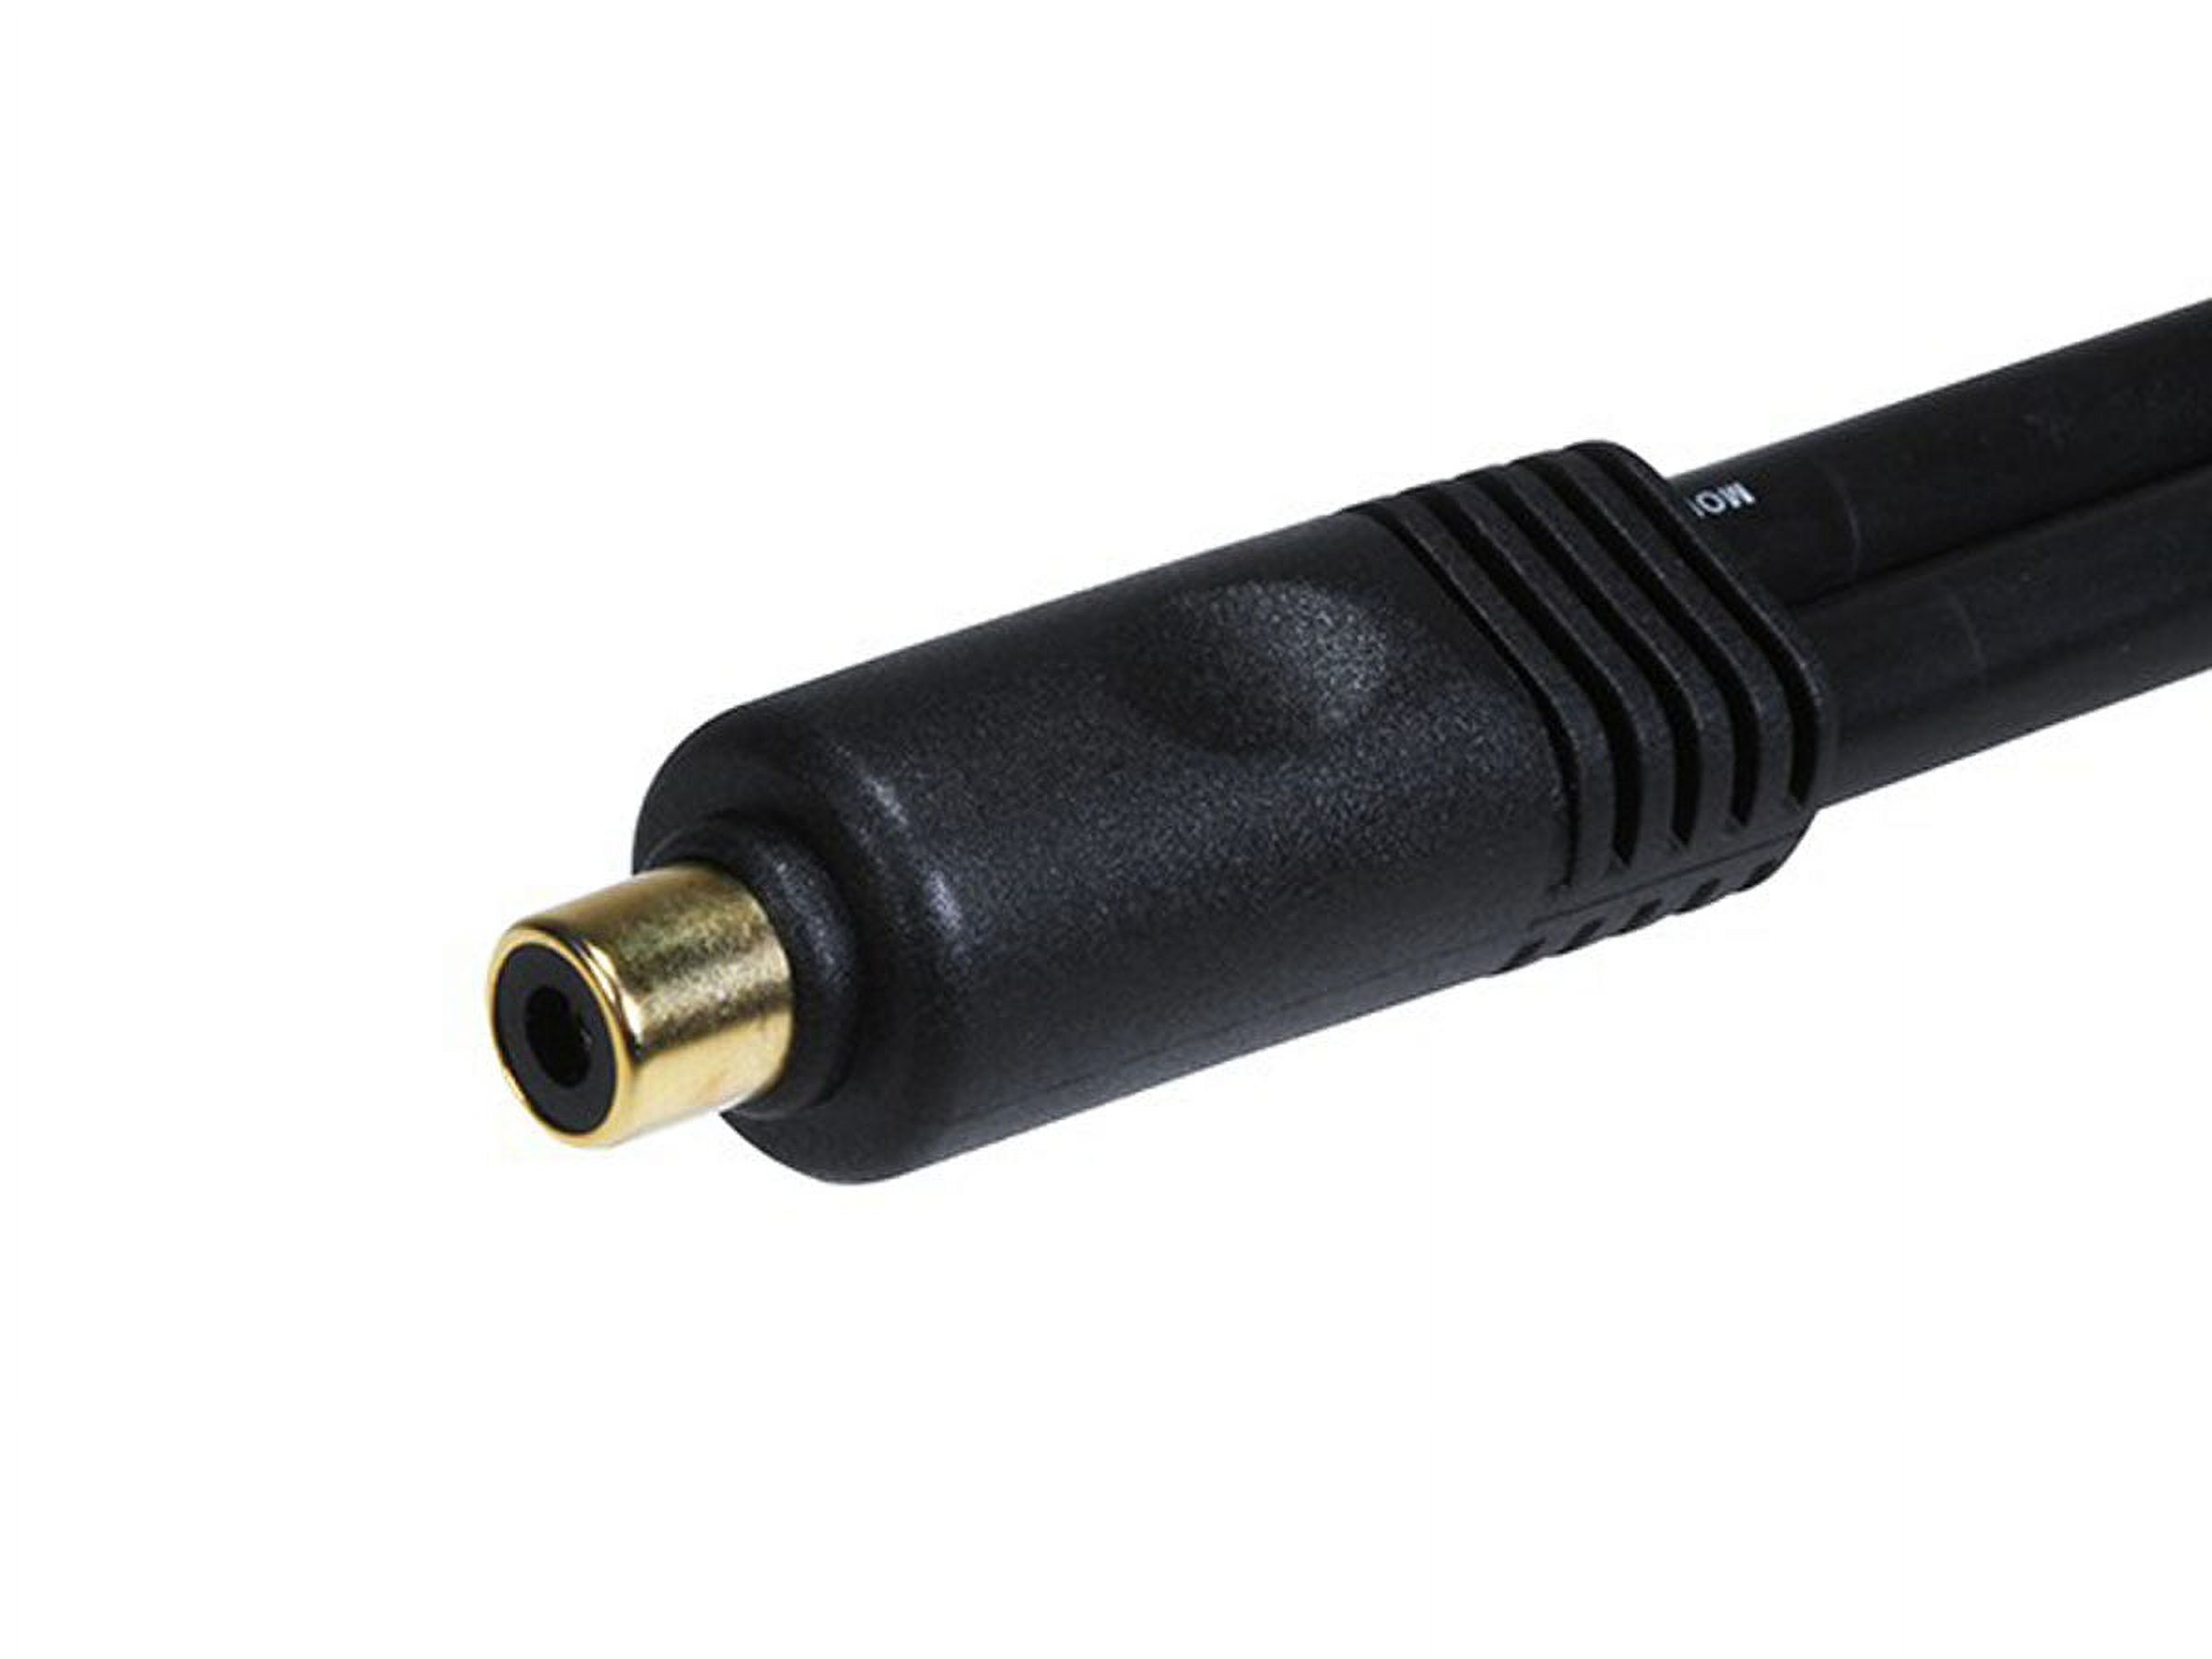 Monoprice Digital Coaxial Cable - 0.5 Feet - RCA Female to 2-RCA Male Splitter Adapter, single, Gold plated - image 2 of 3